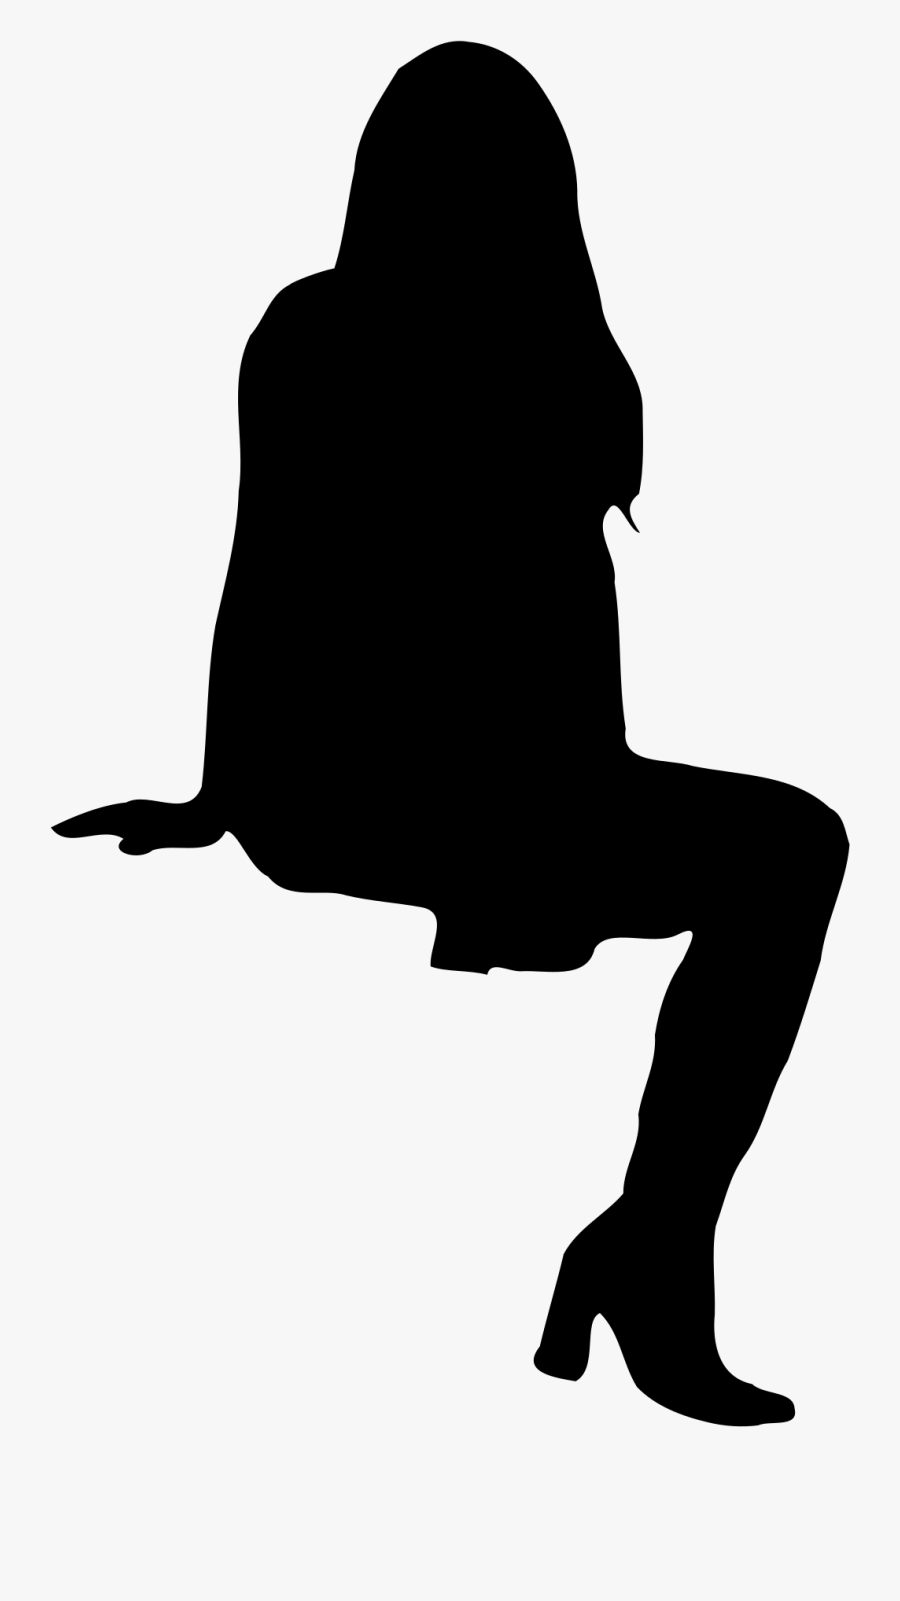 Sit Clipart Human - Woman Sitting Silhouette Png, Transparent Clipart